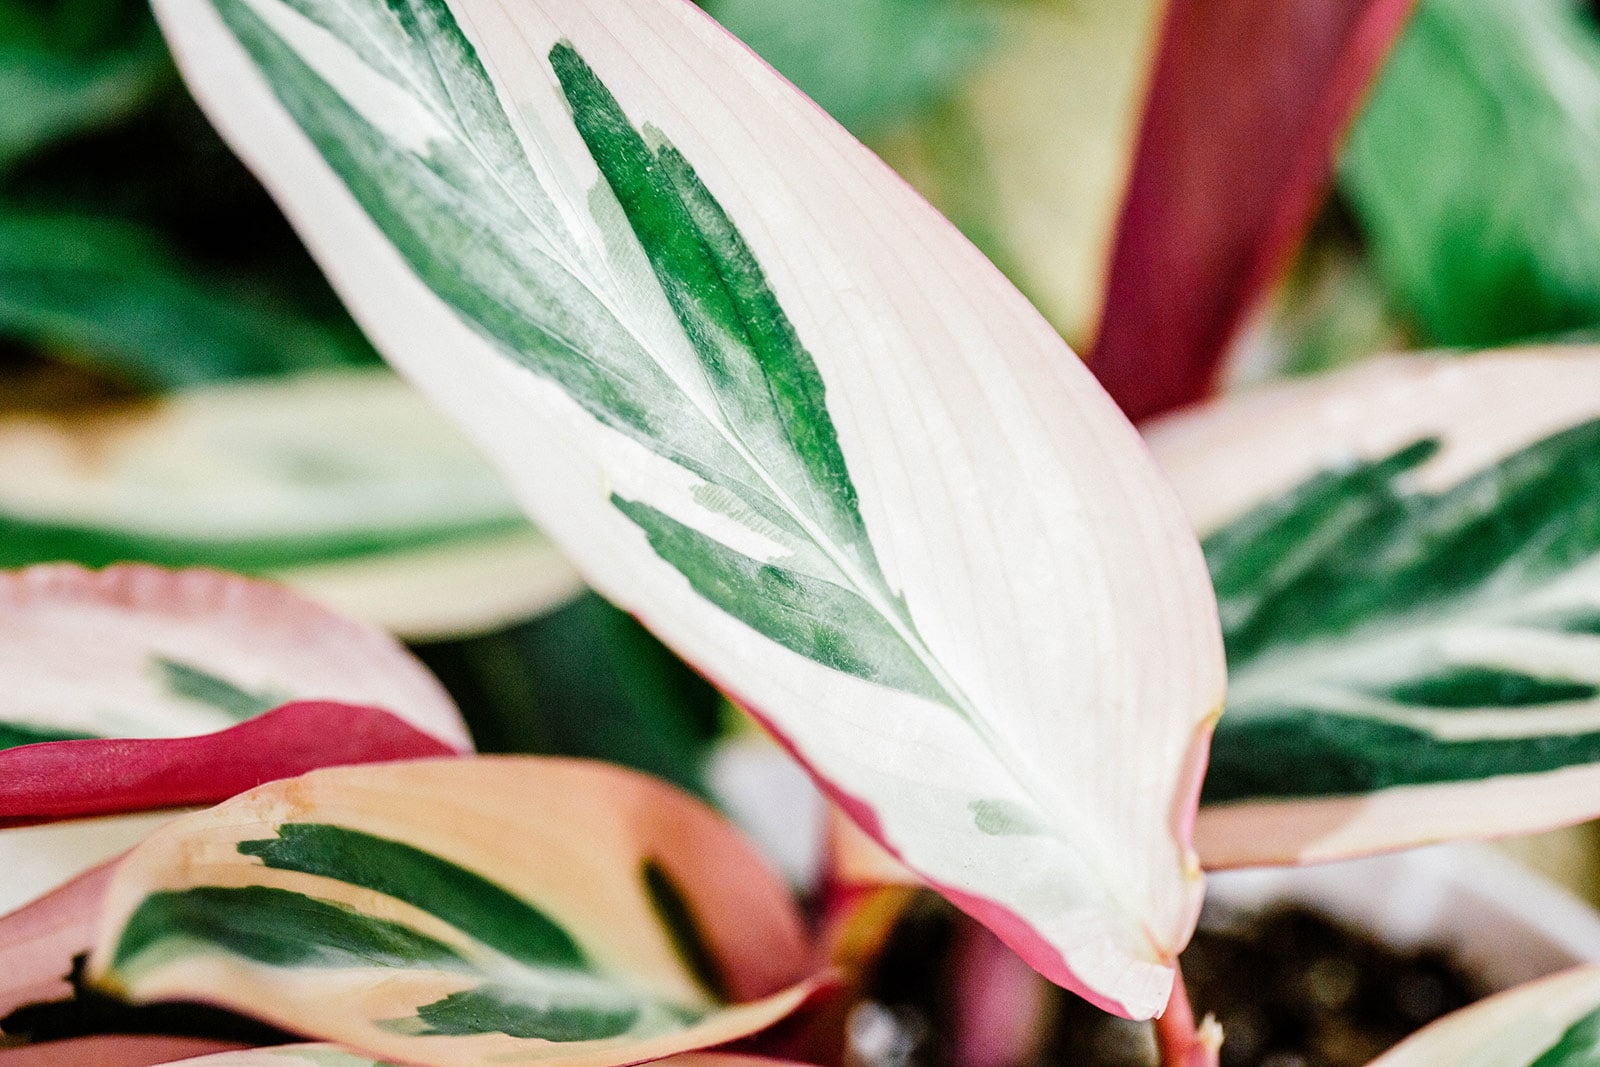 Close-up of a single, green and white patterned Stromanthe Triostar prayer plant leaf with a pink edge